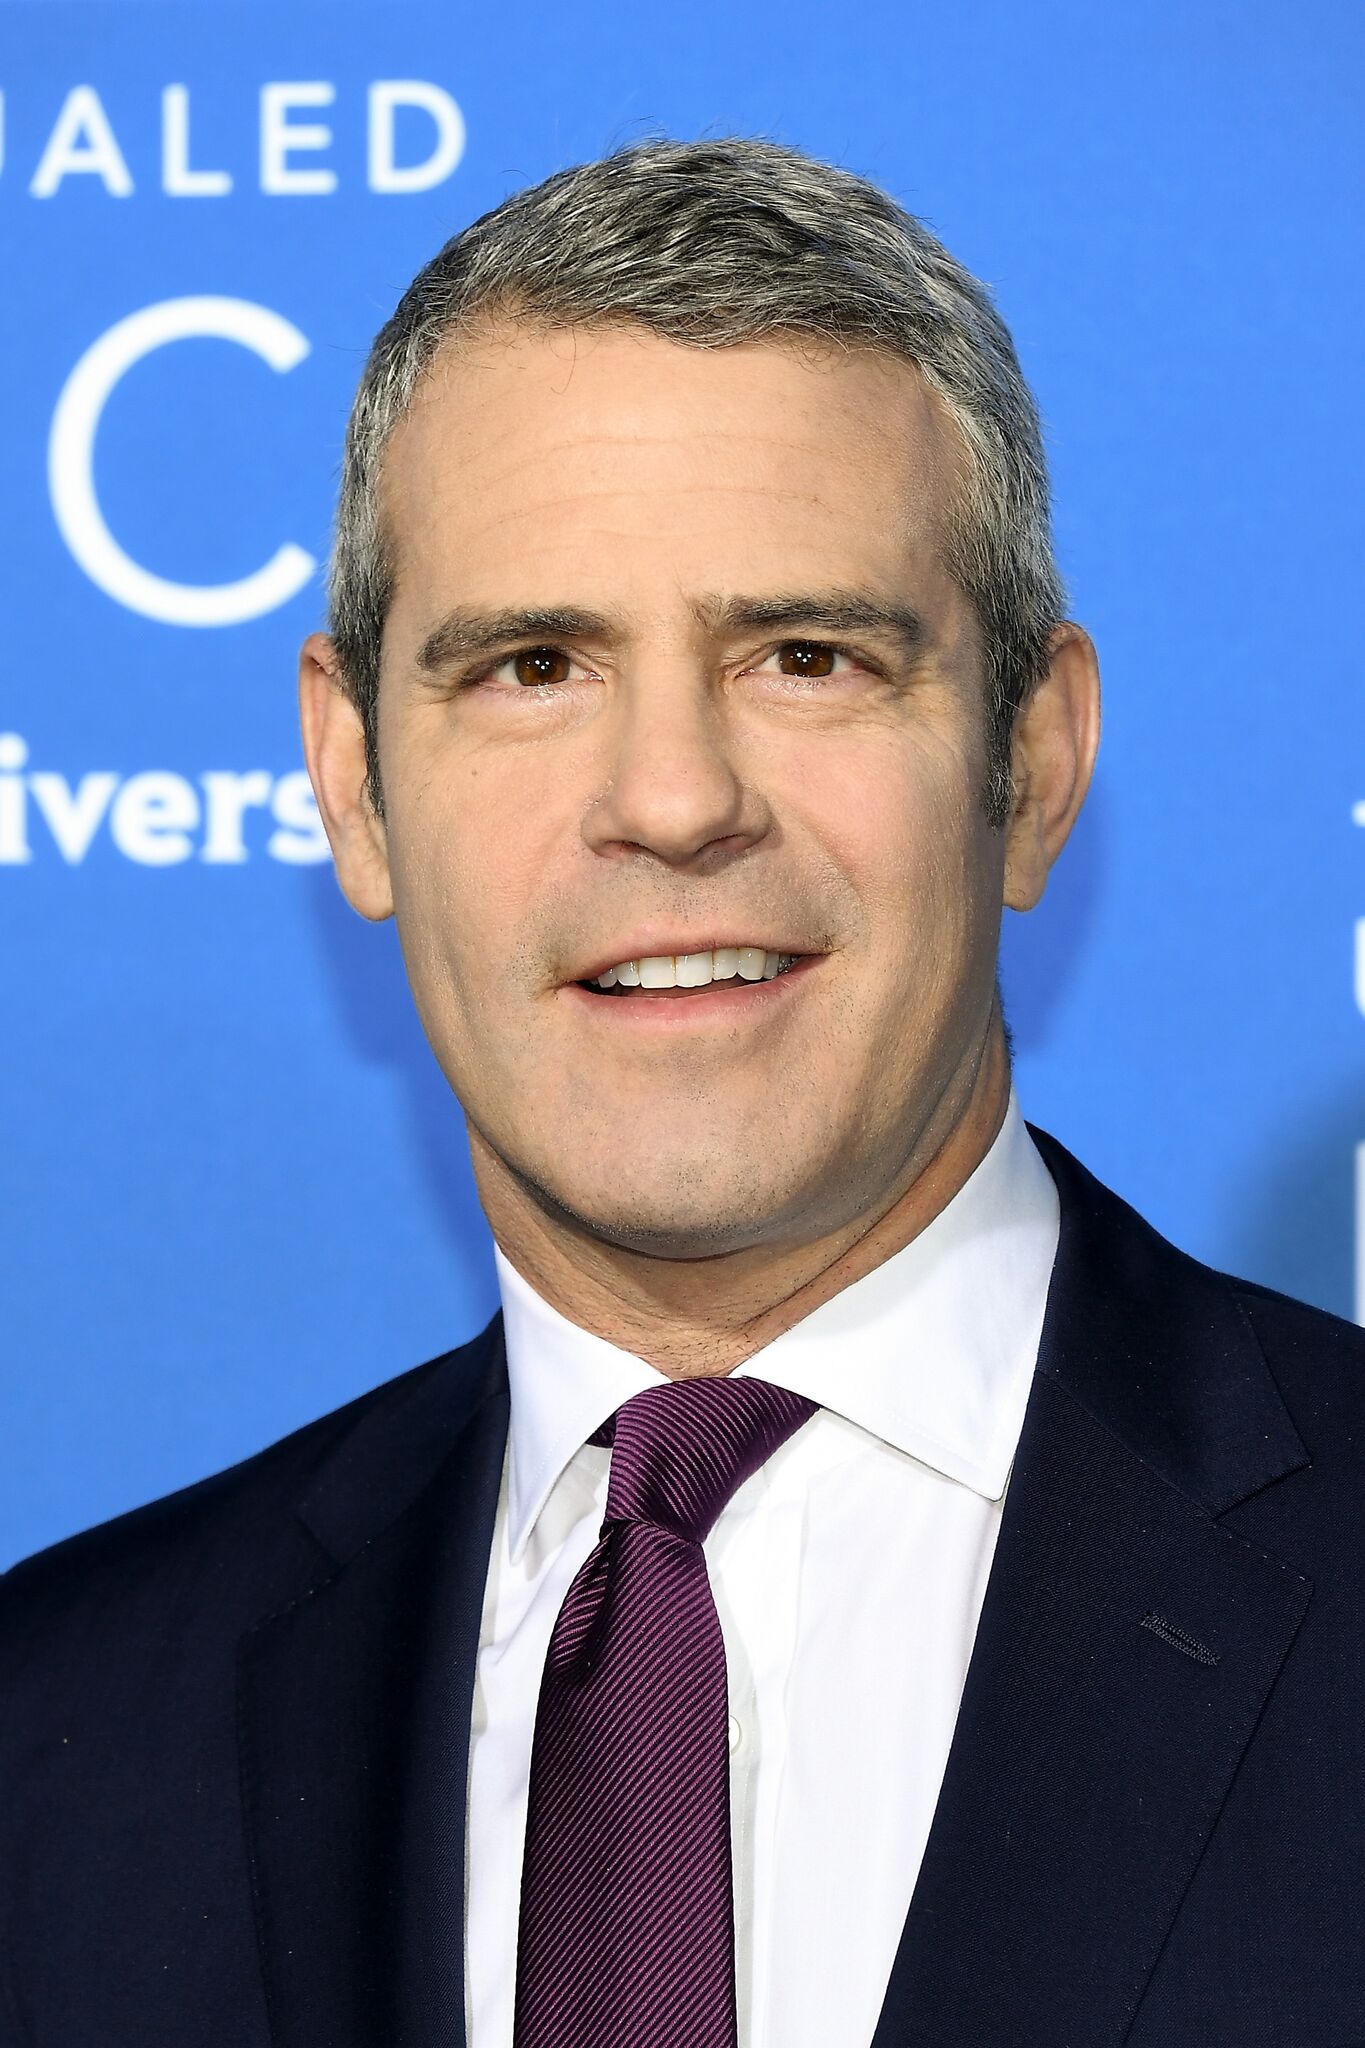 Andy Cohen poses for press photo | Getty Images